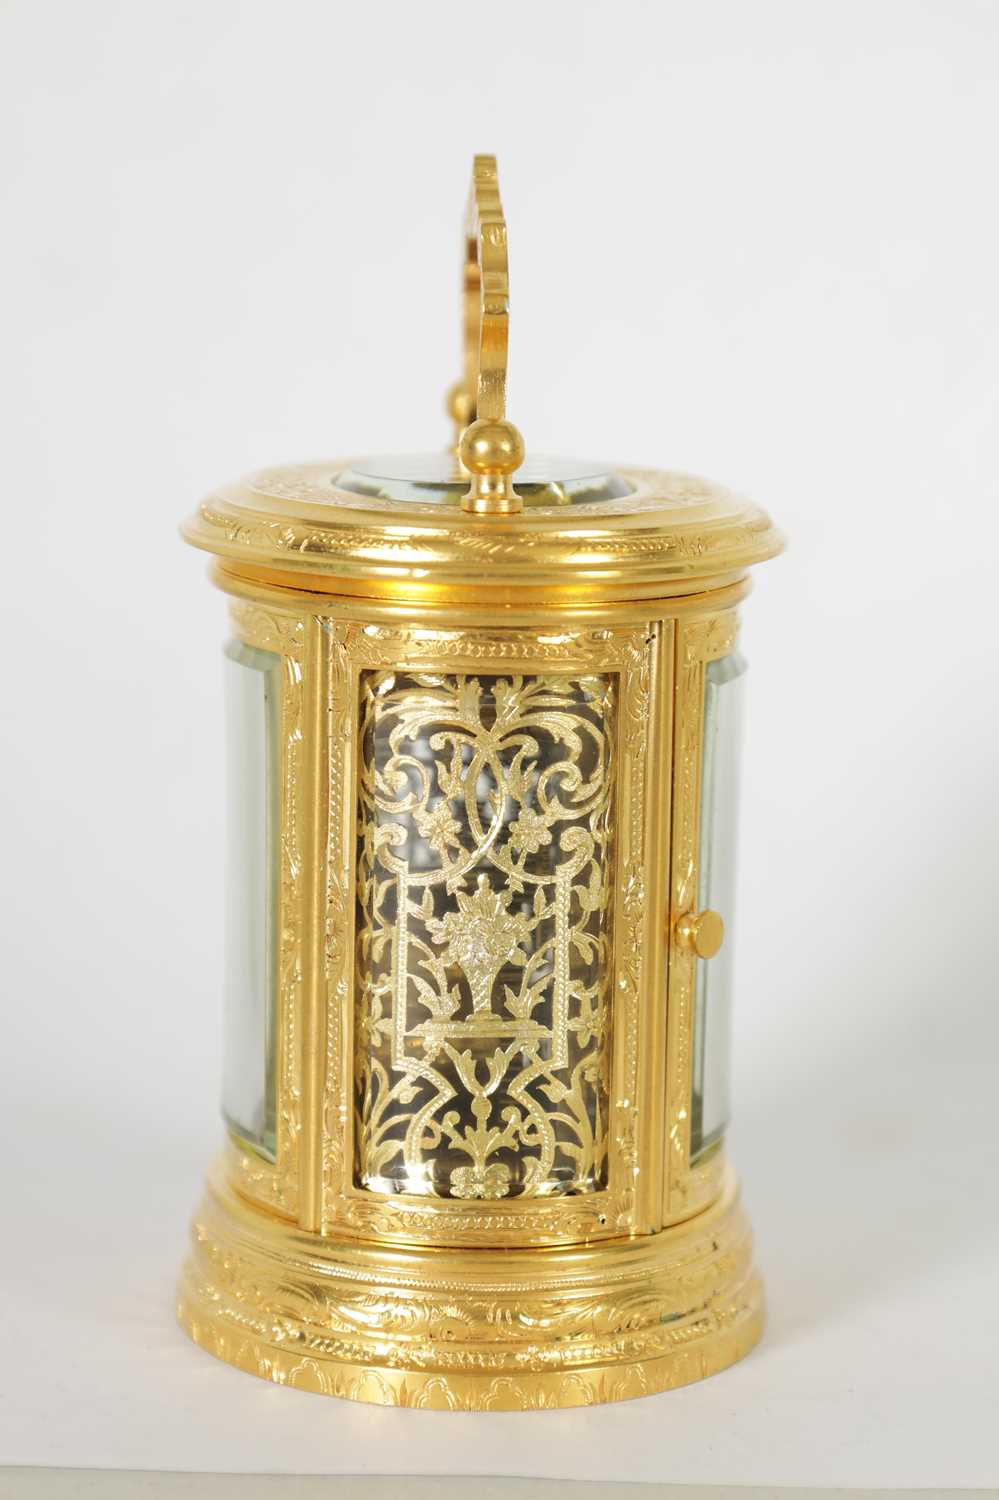 A LATE 19TH CENTURY FRENCH MINIATURE ENGRAVED OVAL CARRIAGE CLOCK - Image 4 of 9